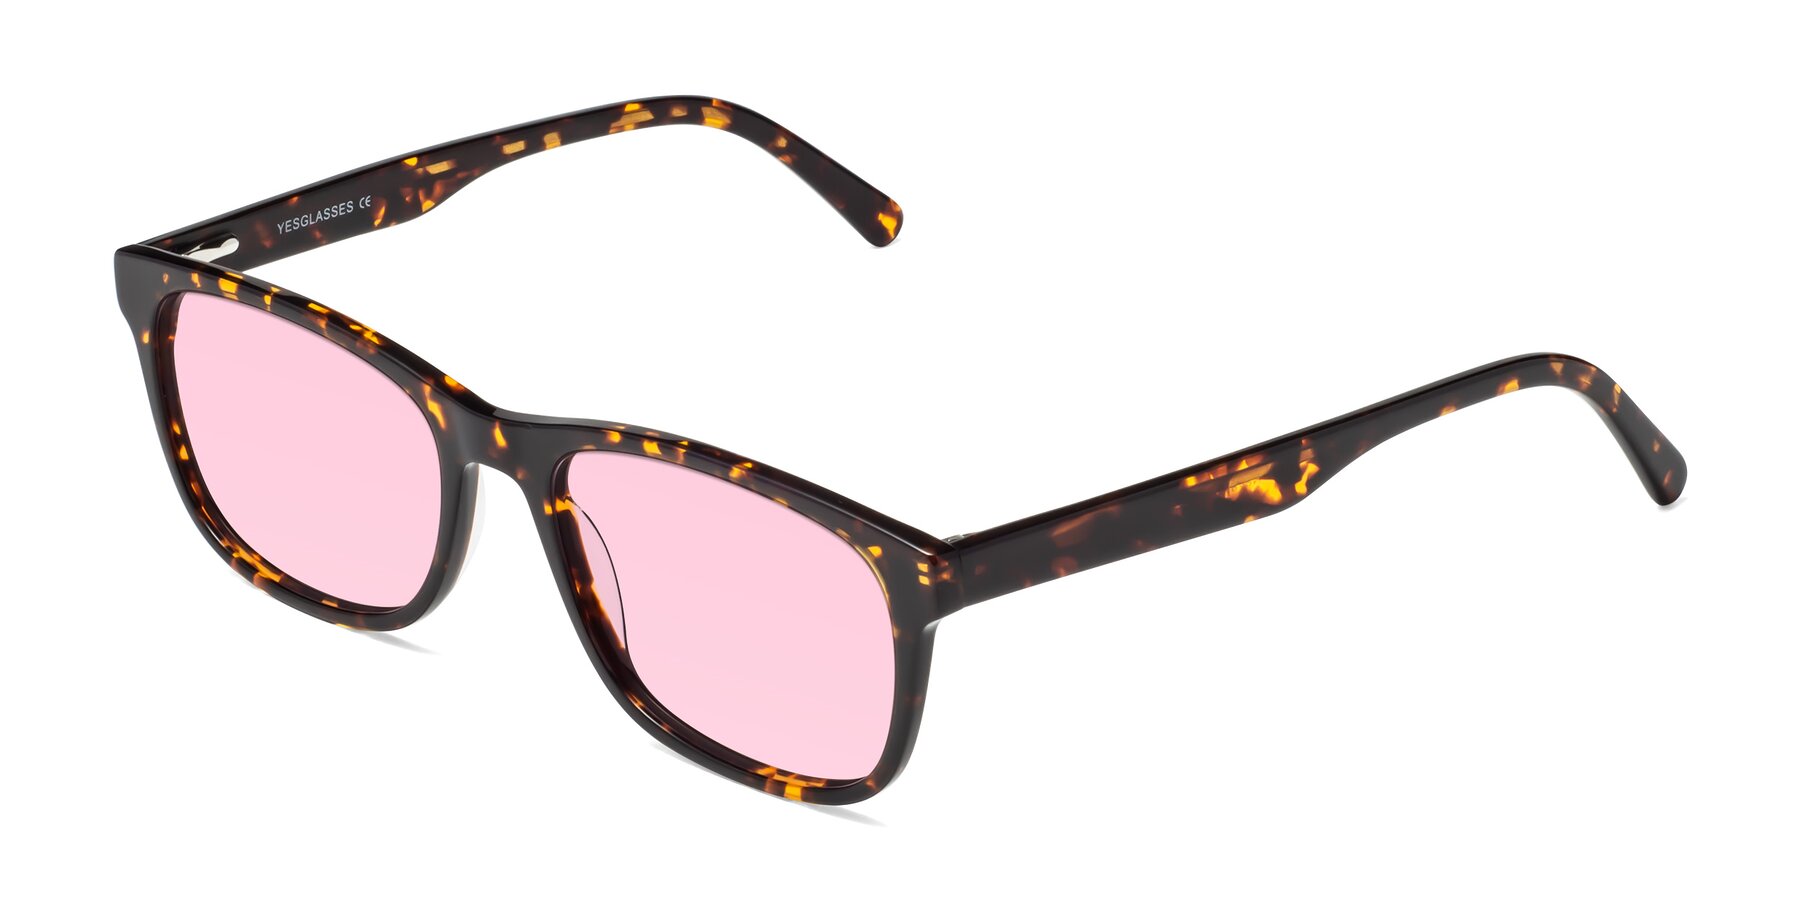 Angle of Navarro in Chocolate-Tortoise with Light Pink Tinted Lenses